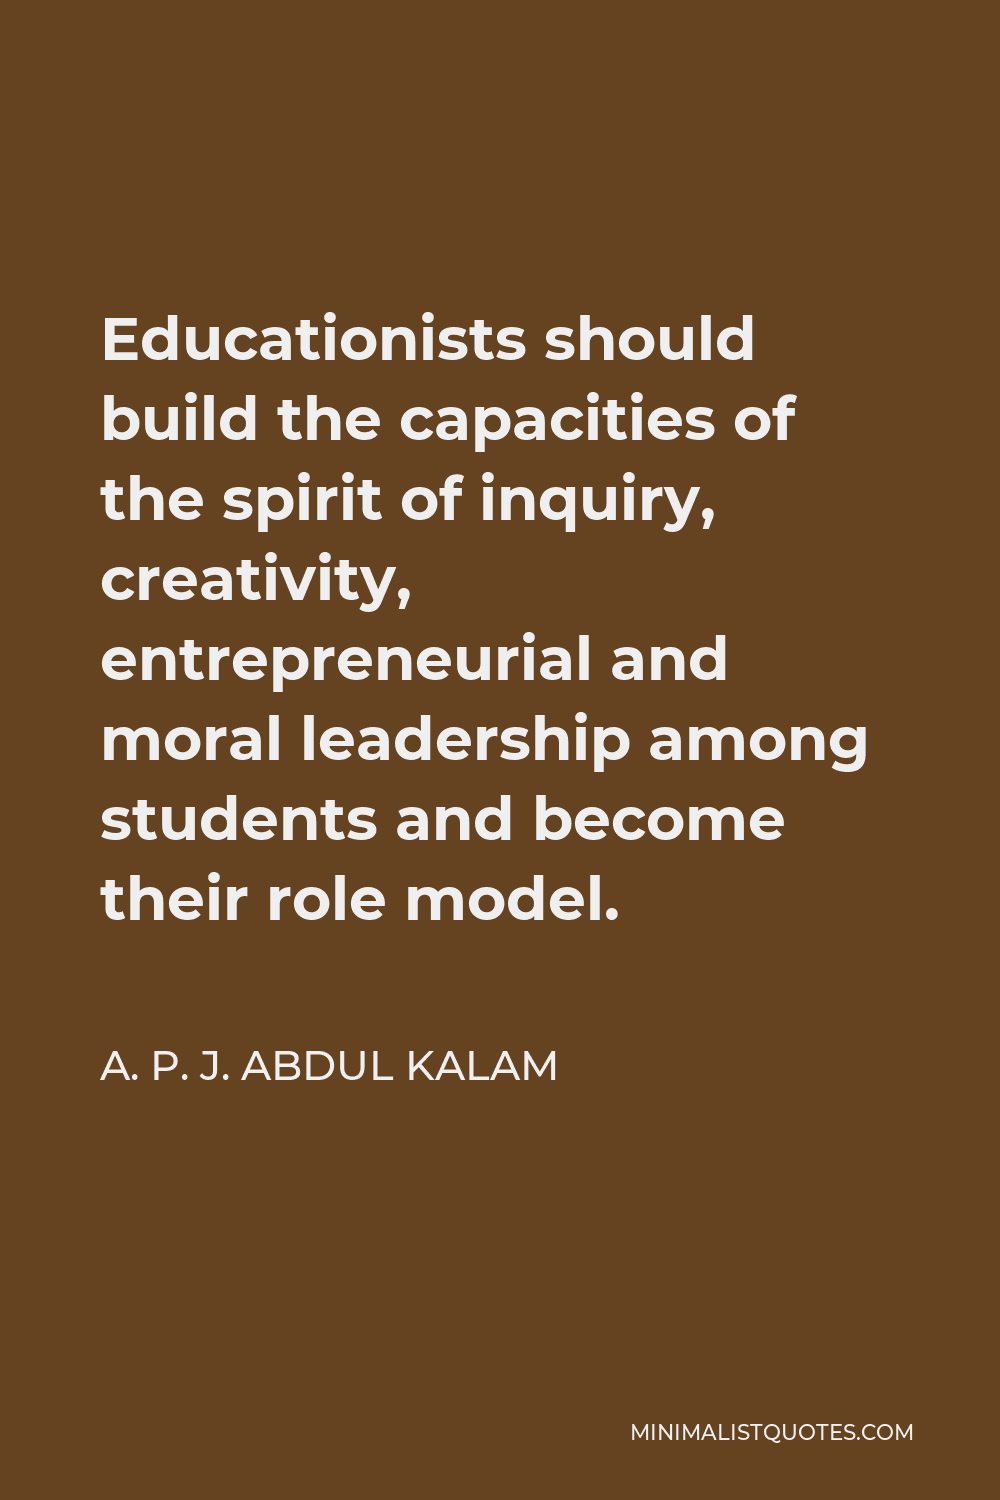 A. P. J. Abdul Kalam Quote - Educationists should build the capacities of the spirit of inquiry, creativity, entrepreneurial and moral leadership among students and become their role model.